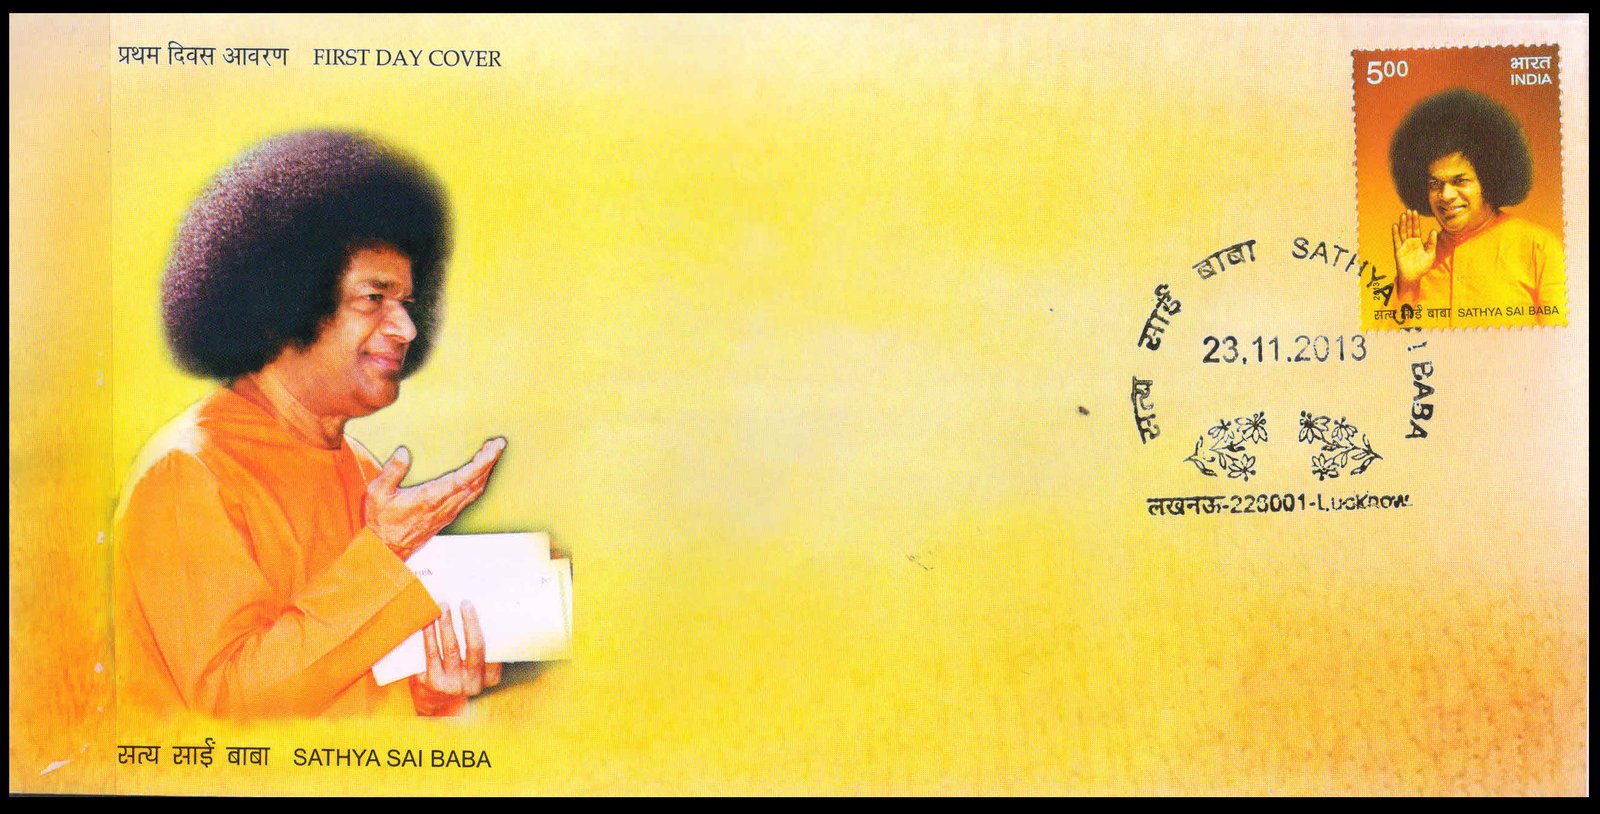 INDIA 23-11-2013, Sathya Sai Baba, First Day Cover